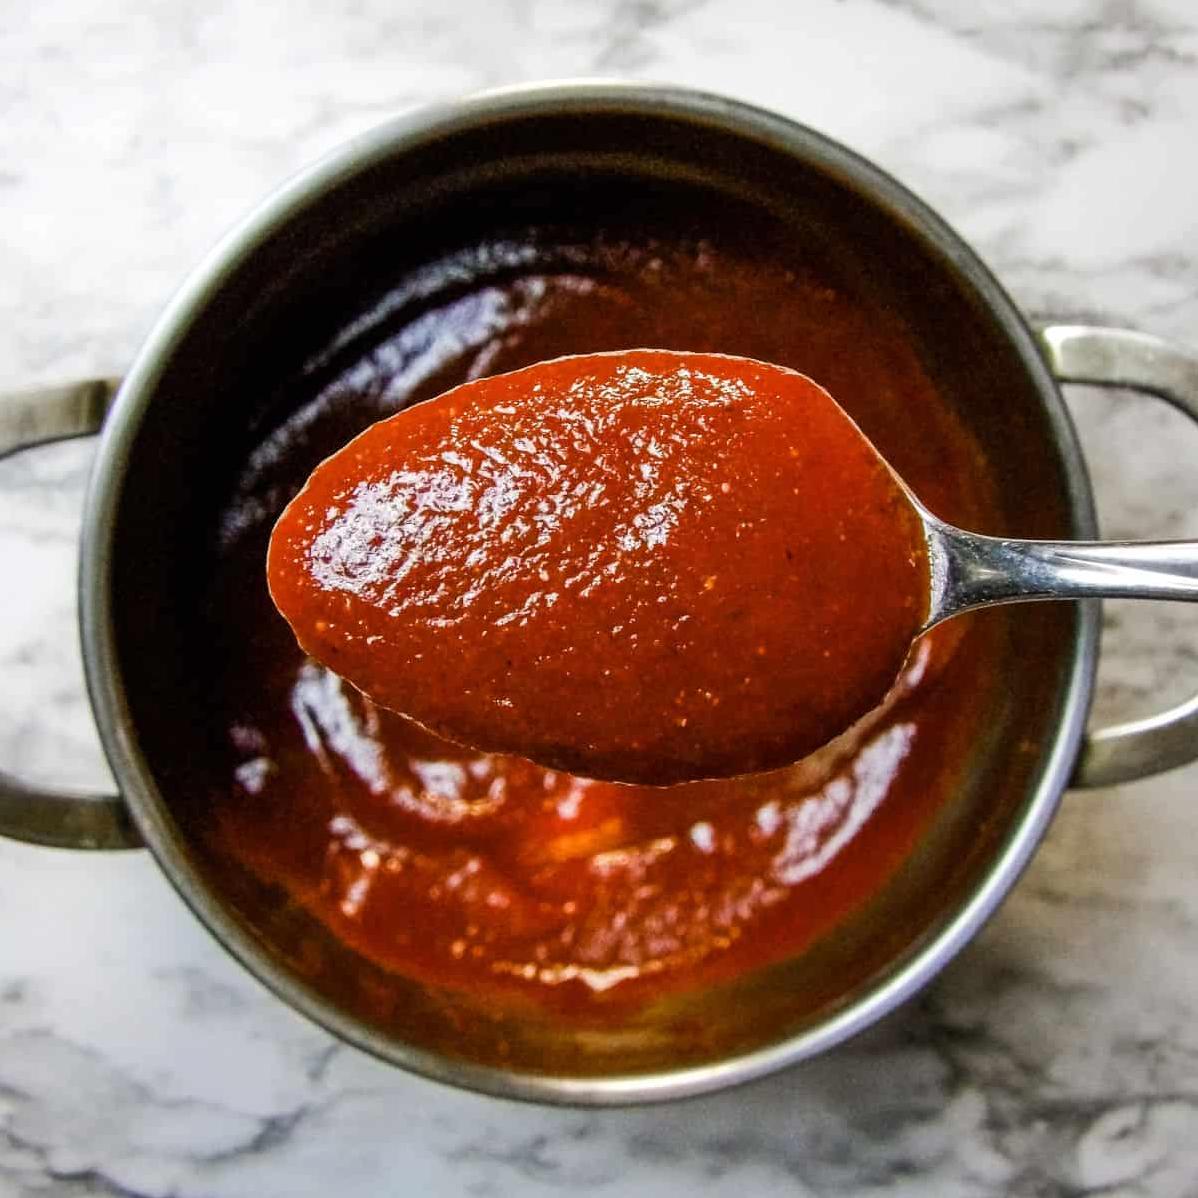  Nothing beats the tangy and sweet flavors of this classic sauce.